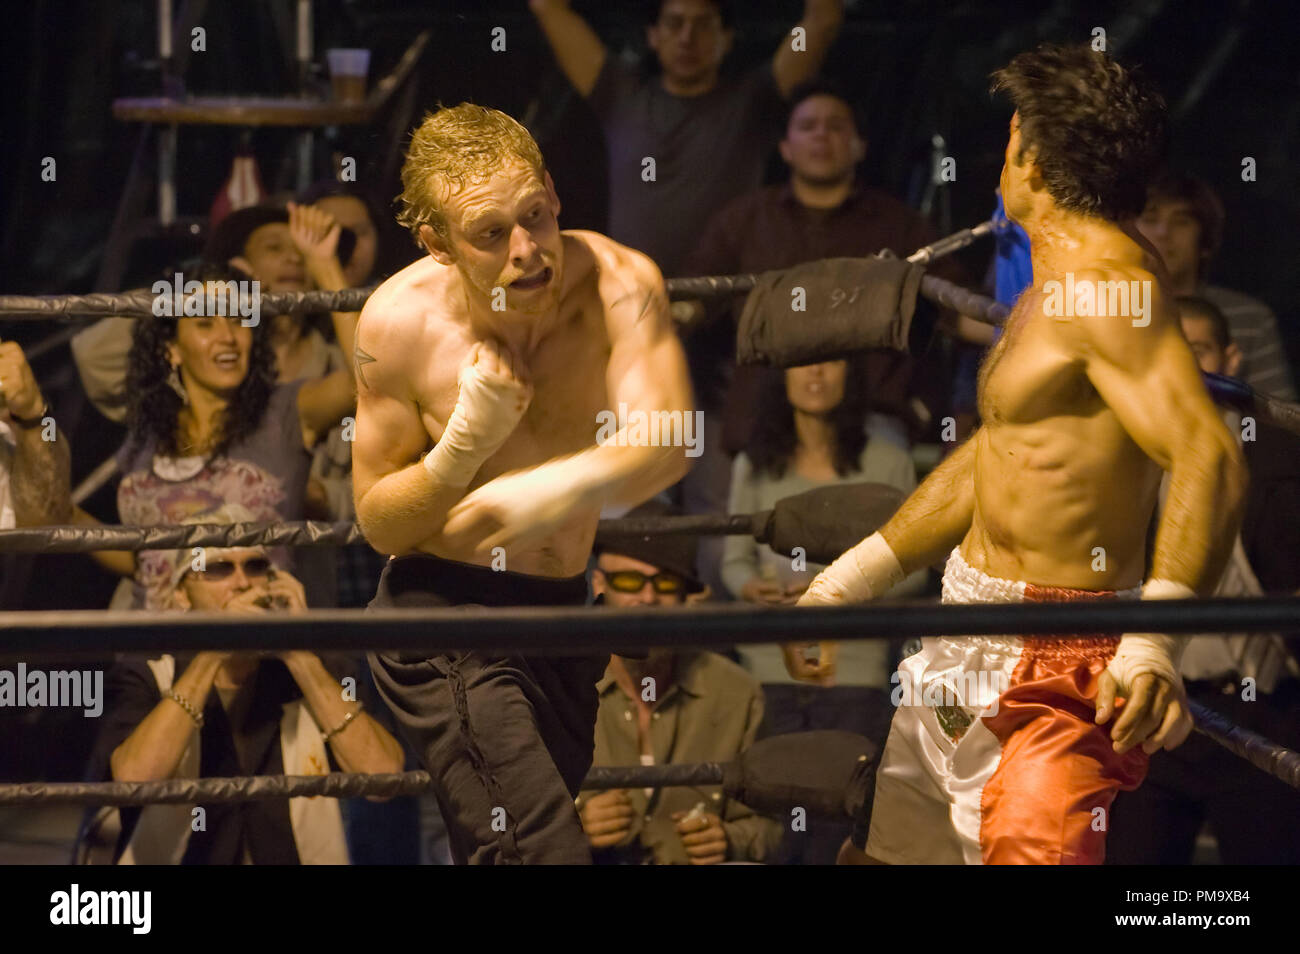 SONS OF ANARCHY: Episode 'OLD BONES'   'Half Sack'  (Johnny Lewis, R) fights for the club on SONS OF ANARCHY.  Photo Credit: Prashant Gupta / FX Stock Photo